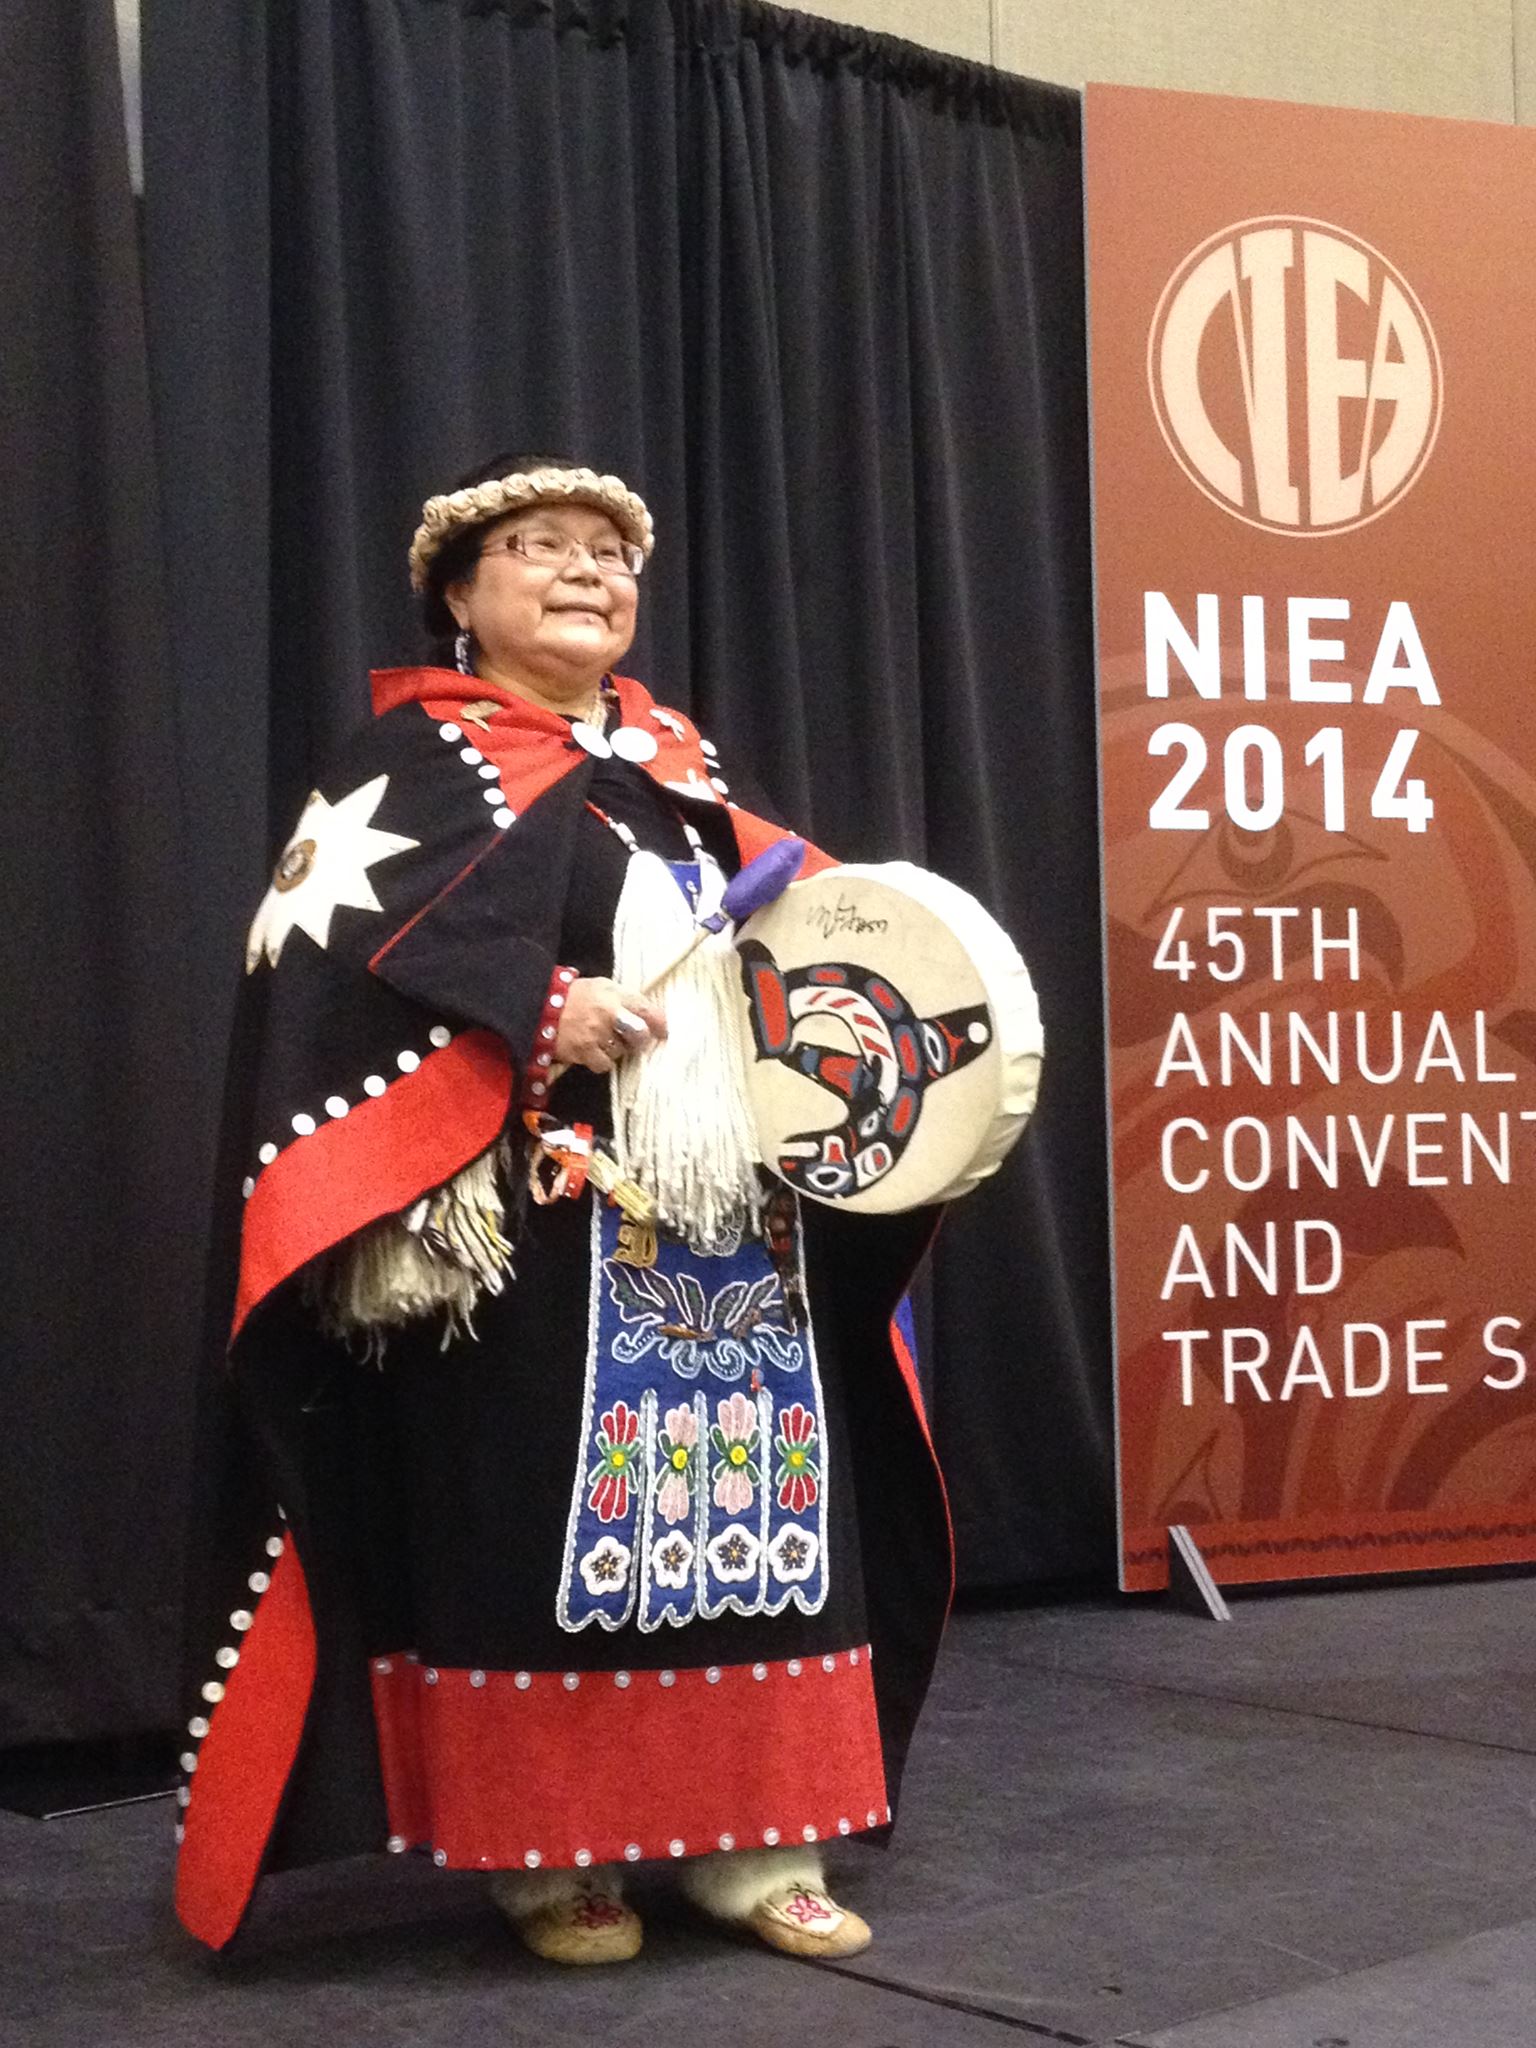 Alaskan Native Cultural Night at NIEA - a woman in traditional dress standing next to a sign that says, "NIEA 2014 45th Annual Convention and Trade Show"